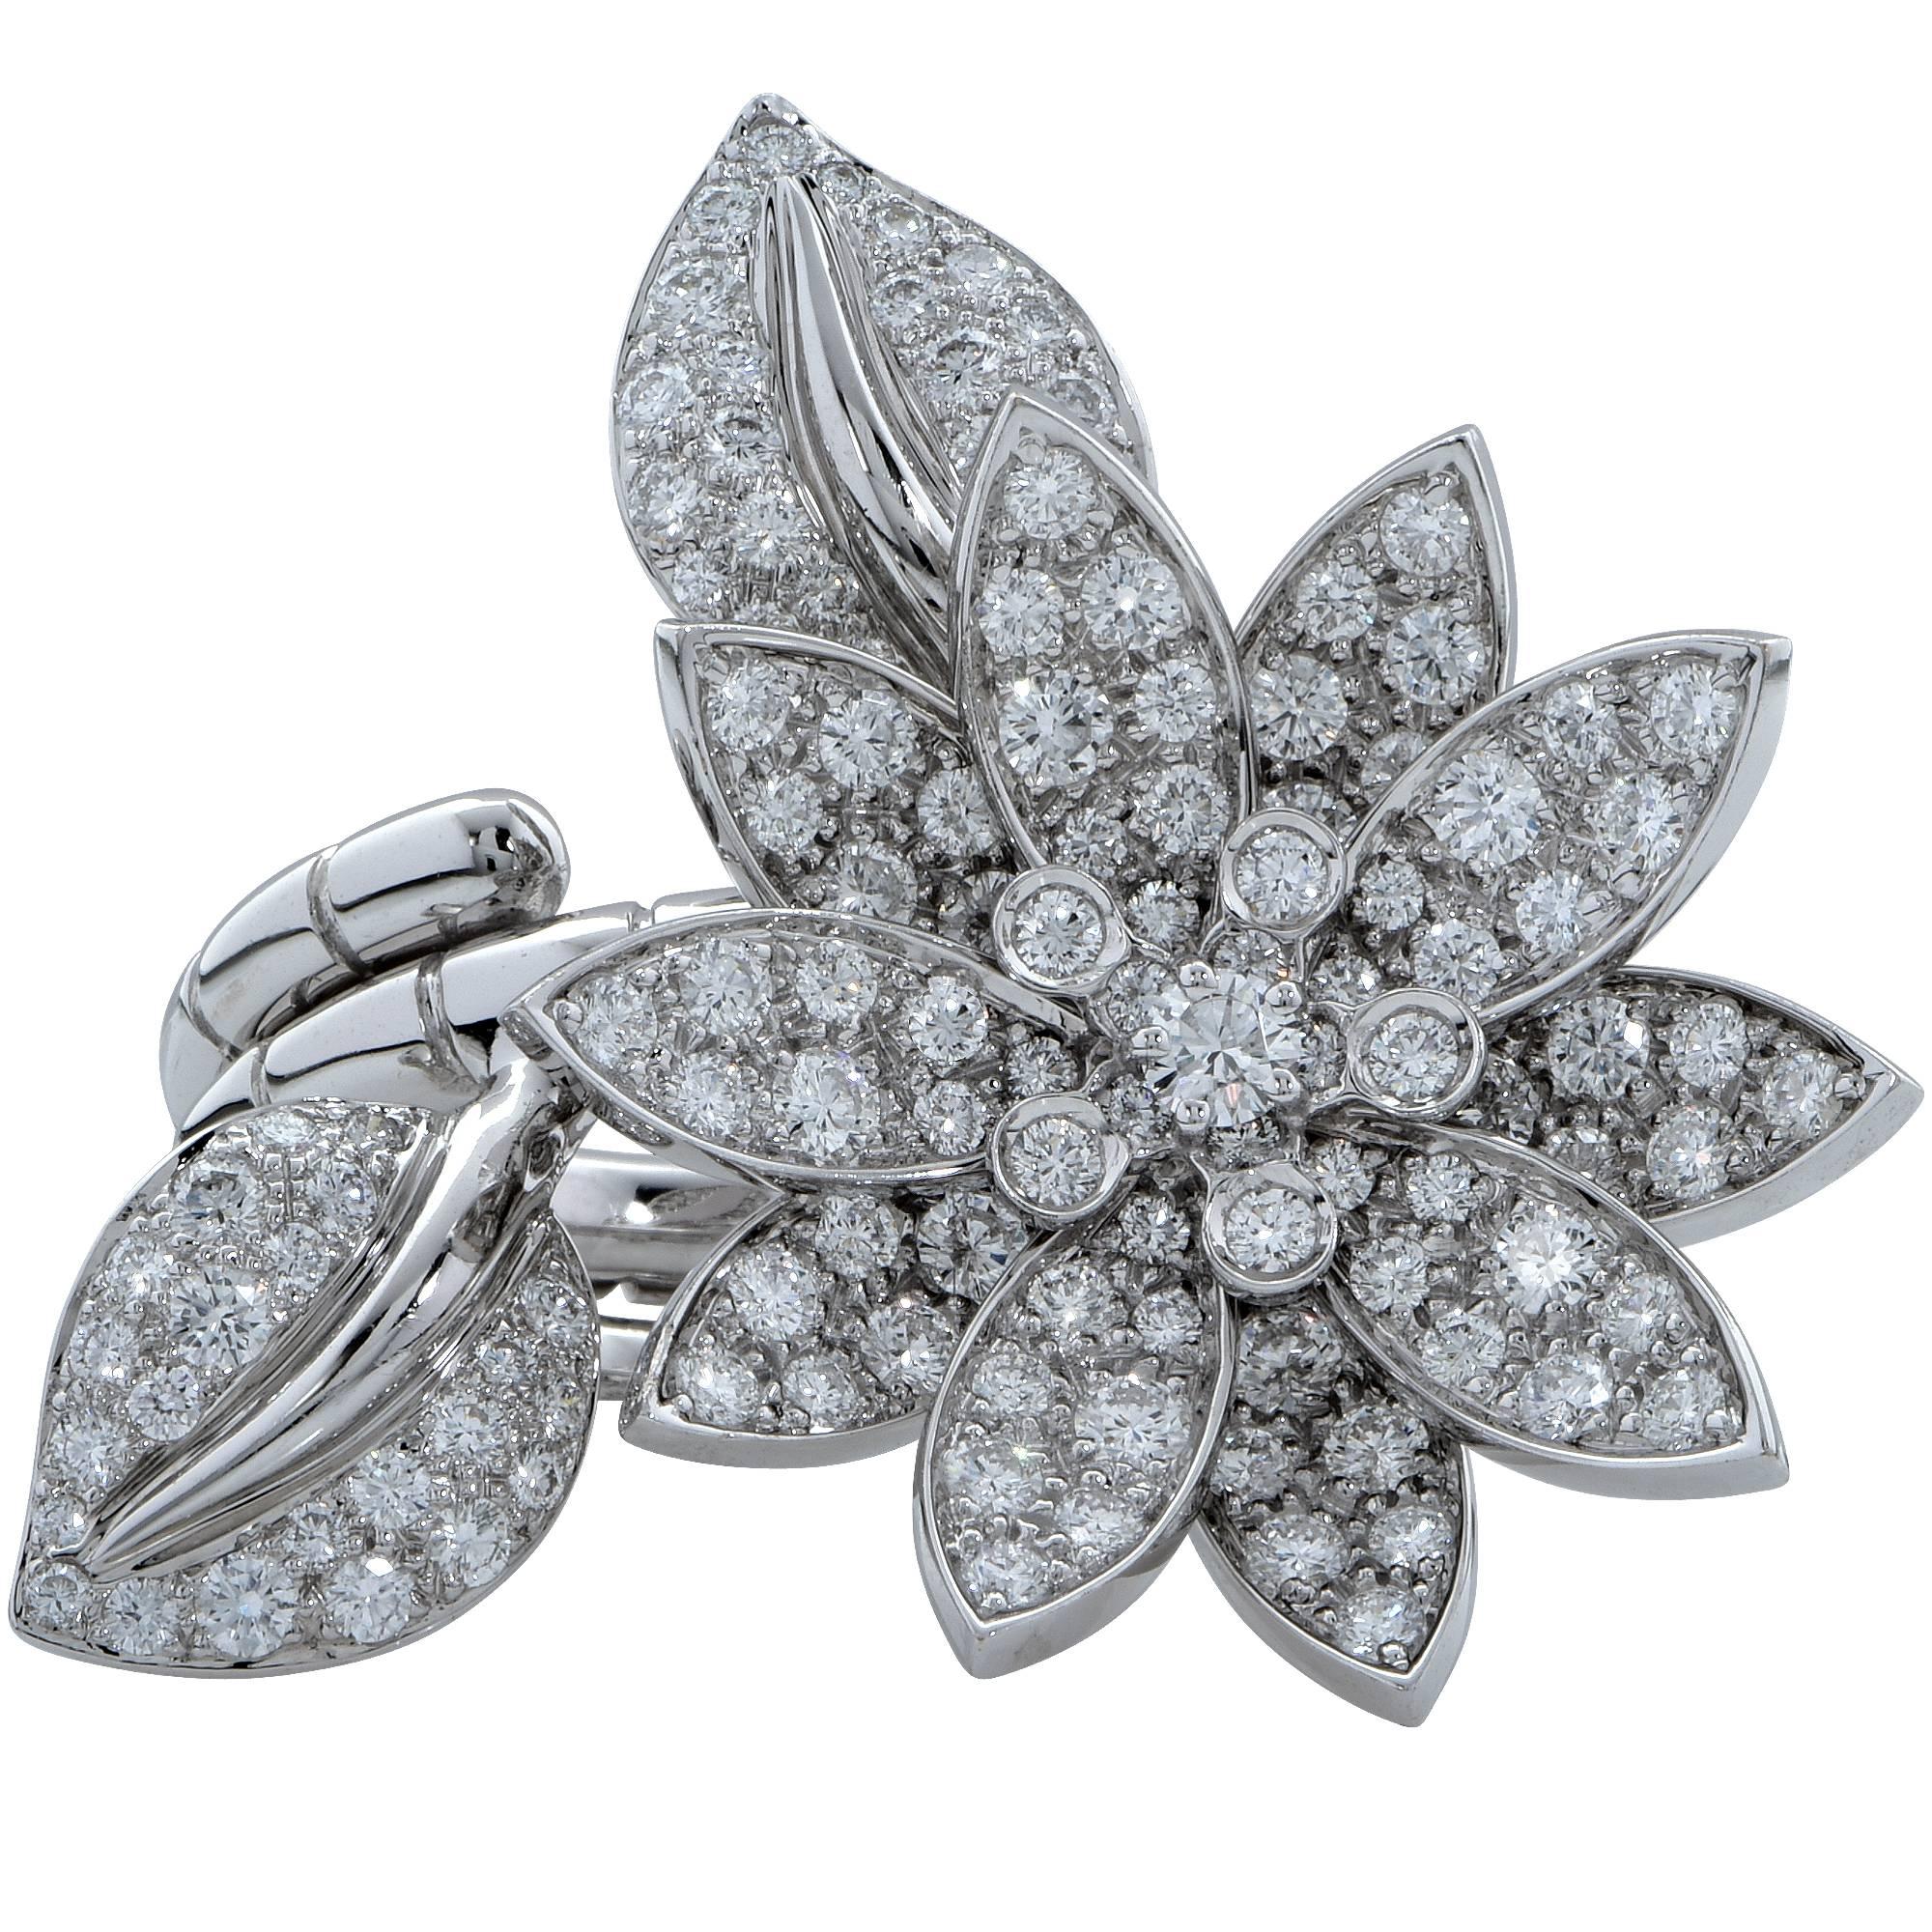 Van Cleef & Arpels Lotus Between the fingers ring hand crafted 18K white gold containing 127 round brilliant cut diamonds weighing 2.13cts D- F color and IF-VVS2 clarity. European size 50, US size 5.25 The current retail is $34,200 USD. A truly